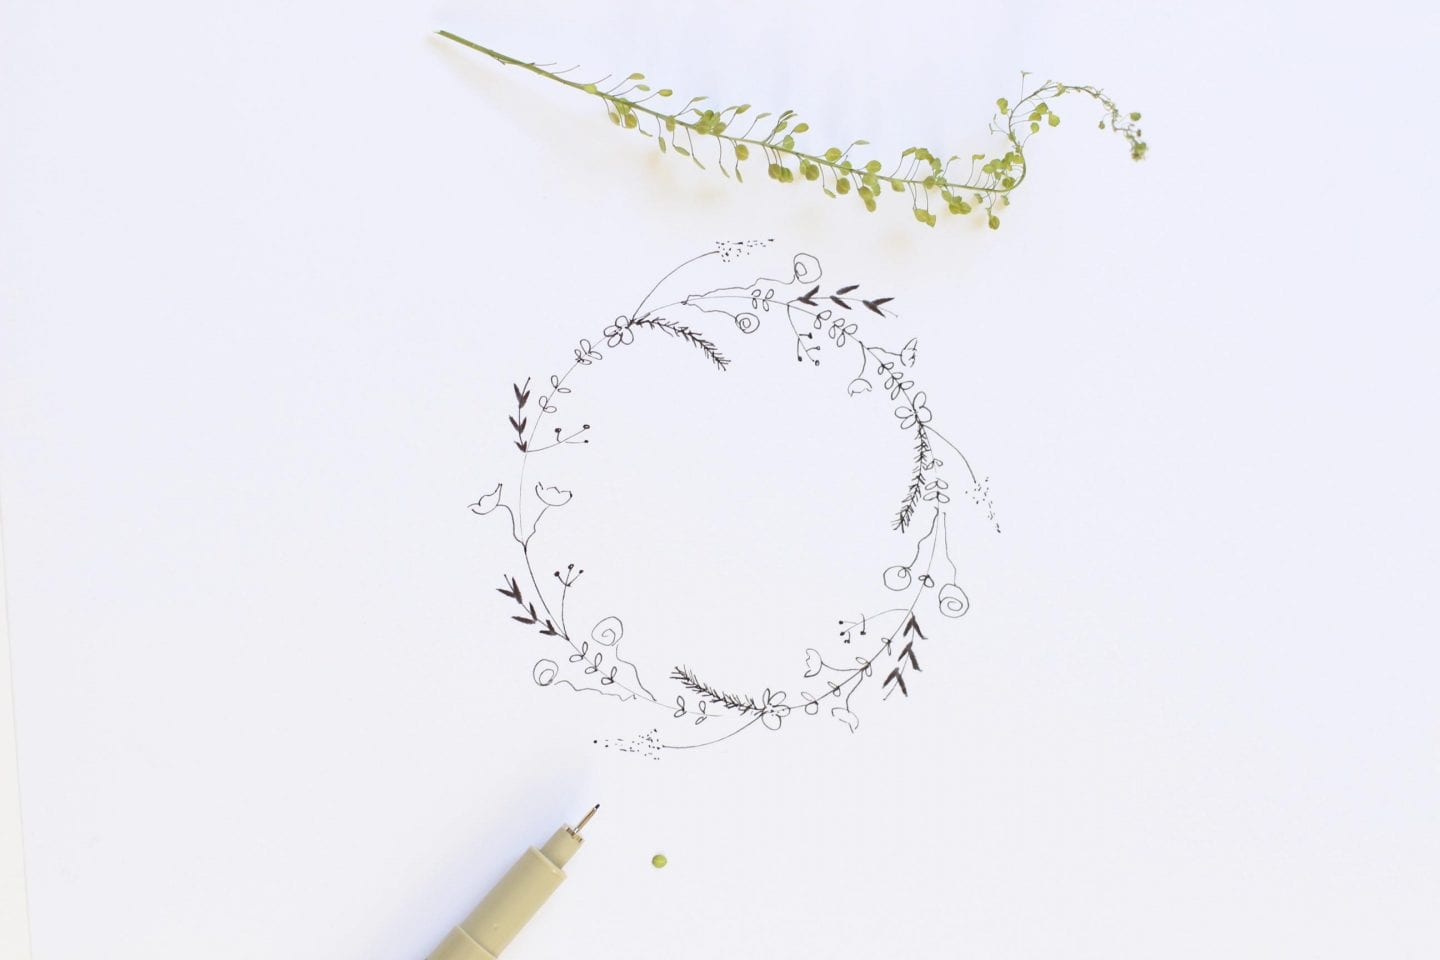 Basic doodling: How to Draw a Botanical Wreath. Online Creative Classes For Spring